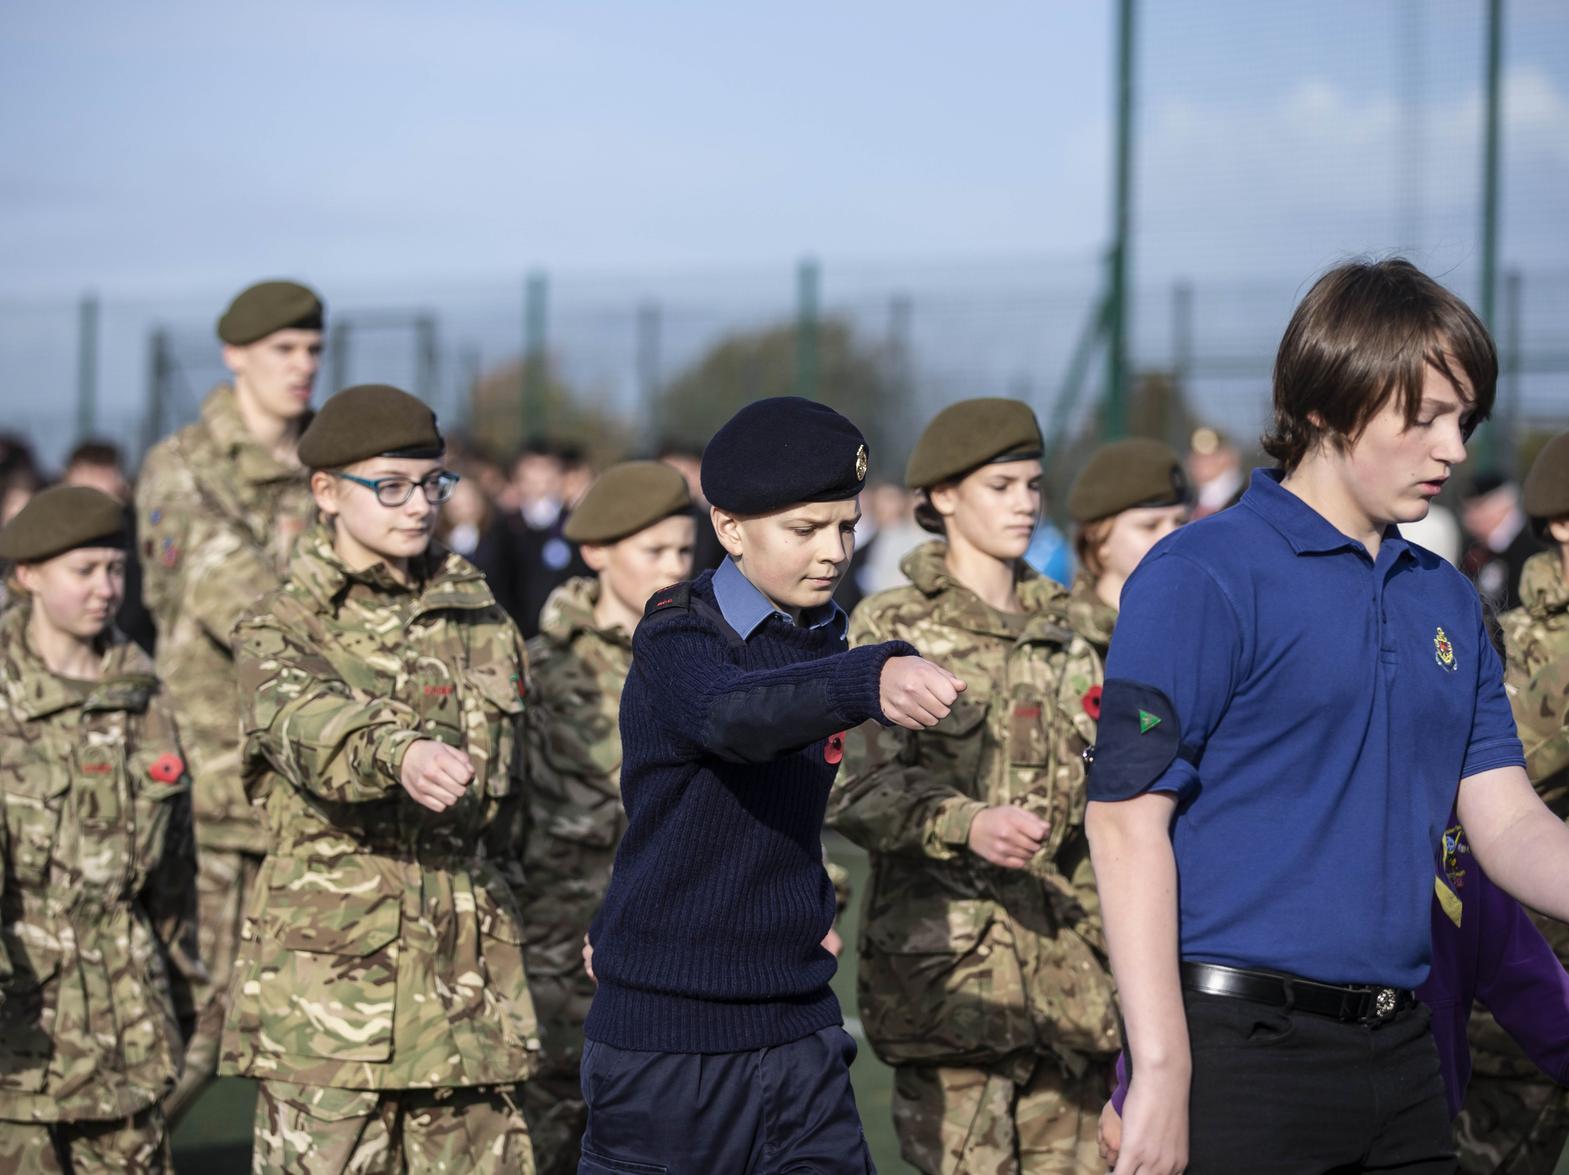 The school's Combined Cadet Force (CCF) regiments took part in the parade today.